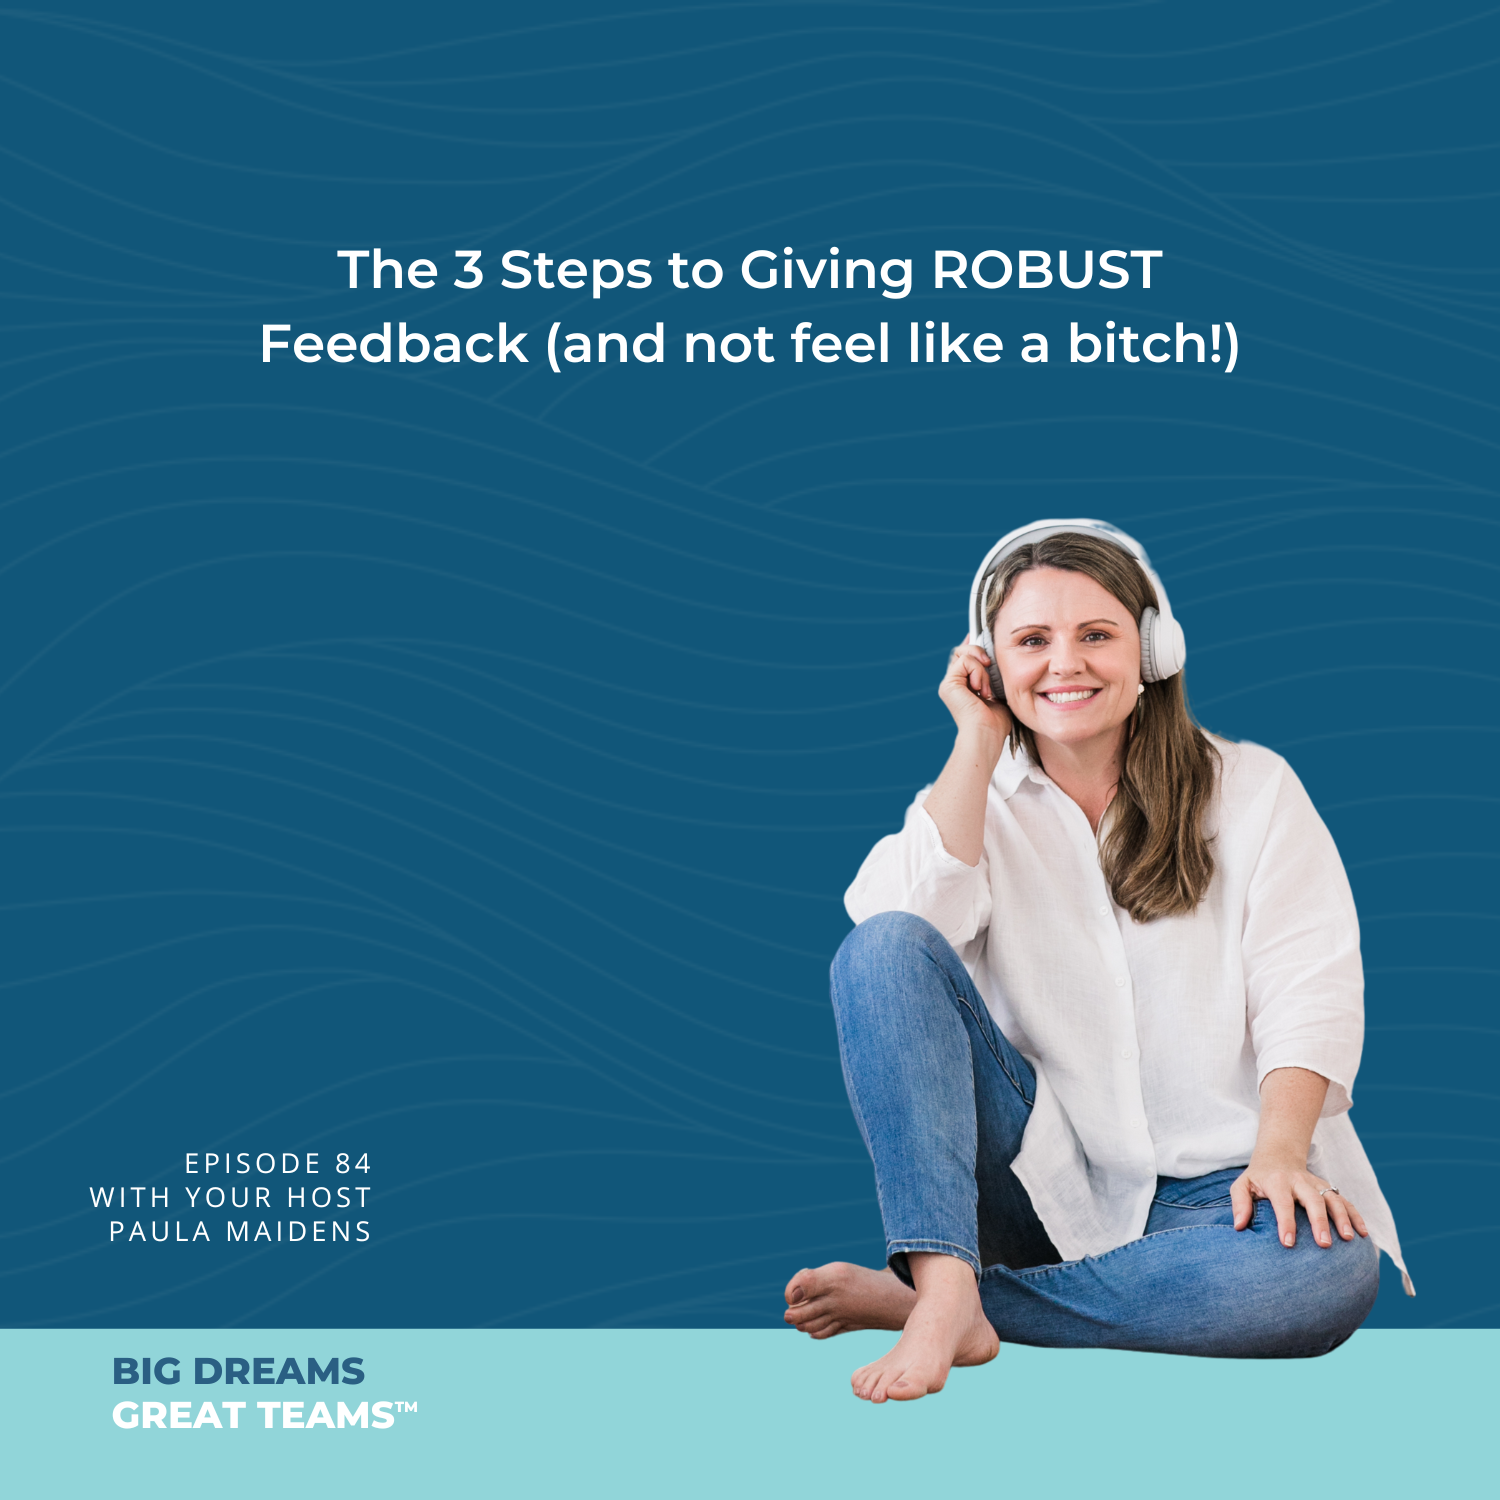 Episode #84 The 3 Steps to Giving ROBUST Feedback (and not feel like a bitch!)